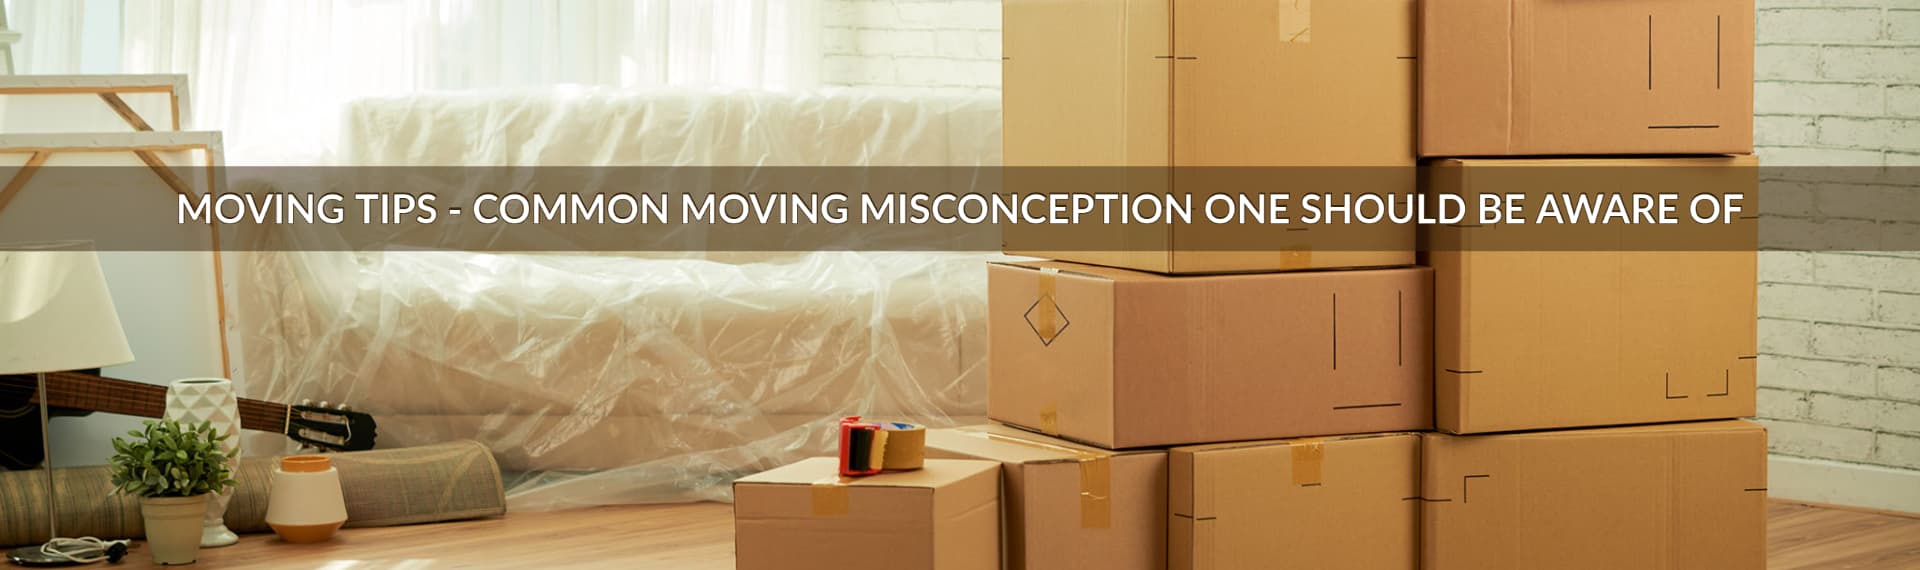 Common Moving Misconception One Should Be Aware Of